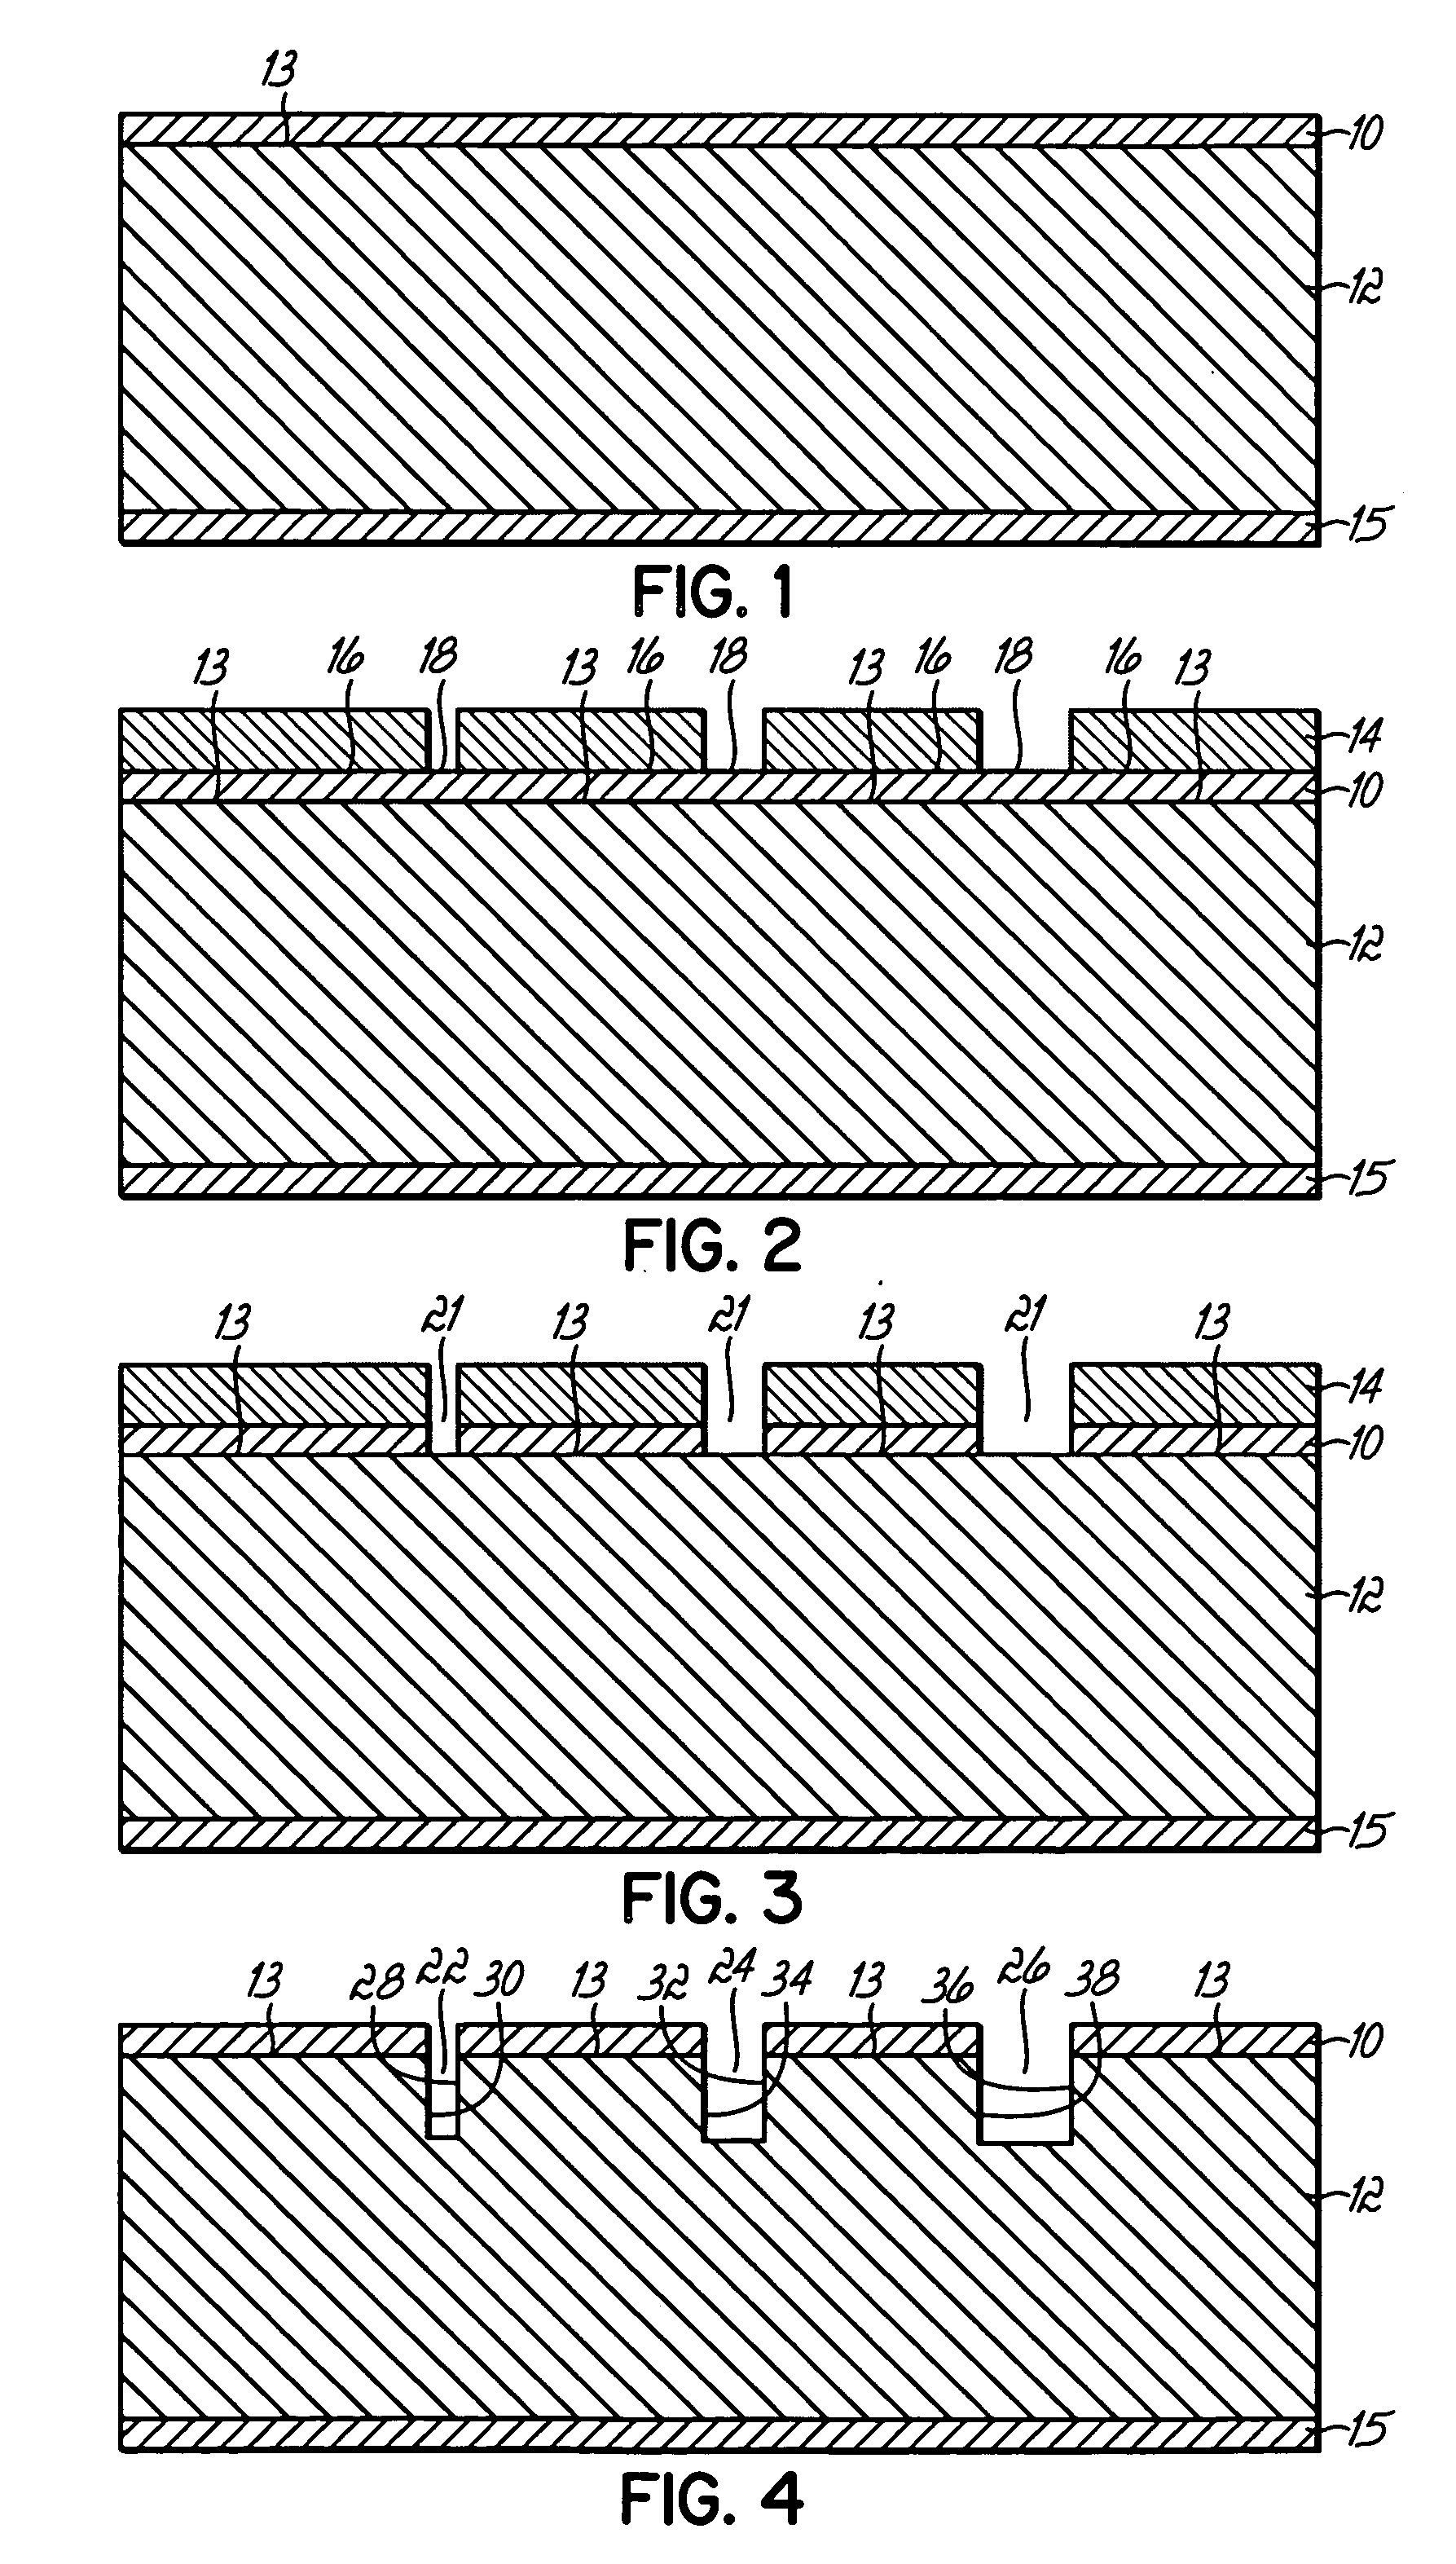 Methods of fabricating structures for characterizing tip shape of scanning probe microscope probes and structures fabricated thereby